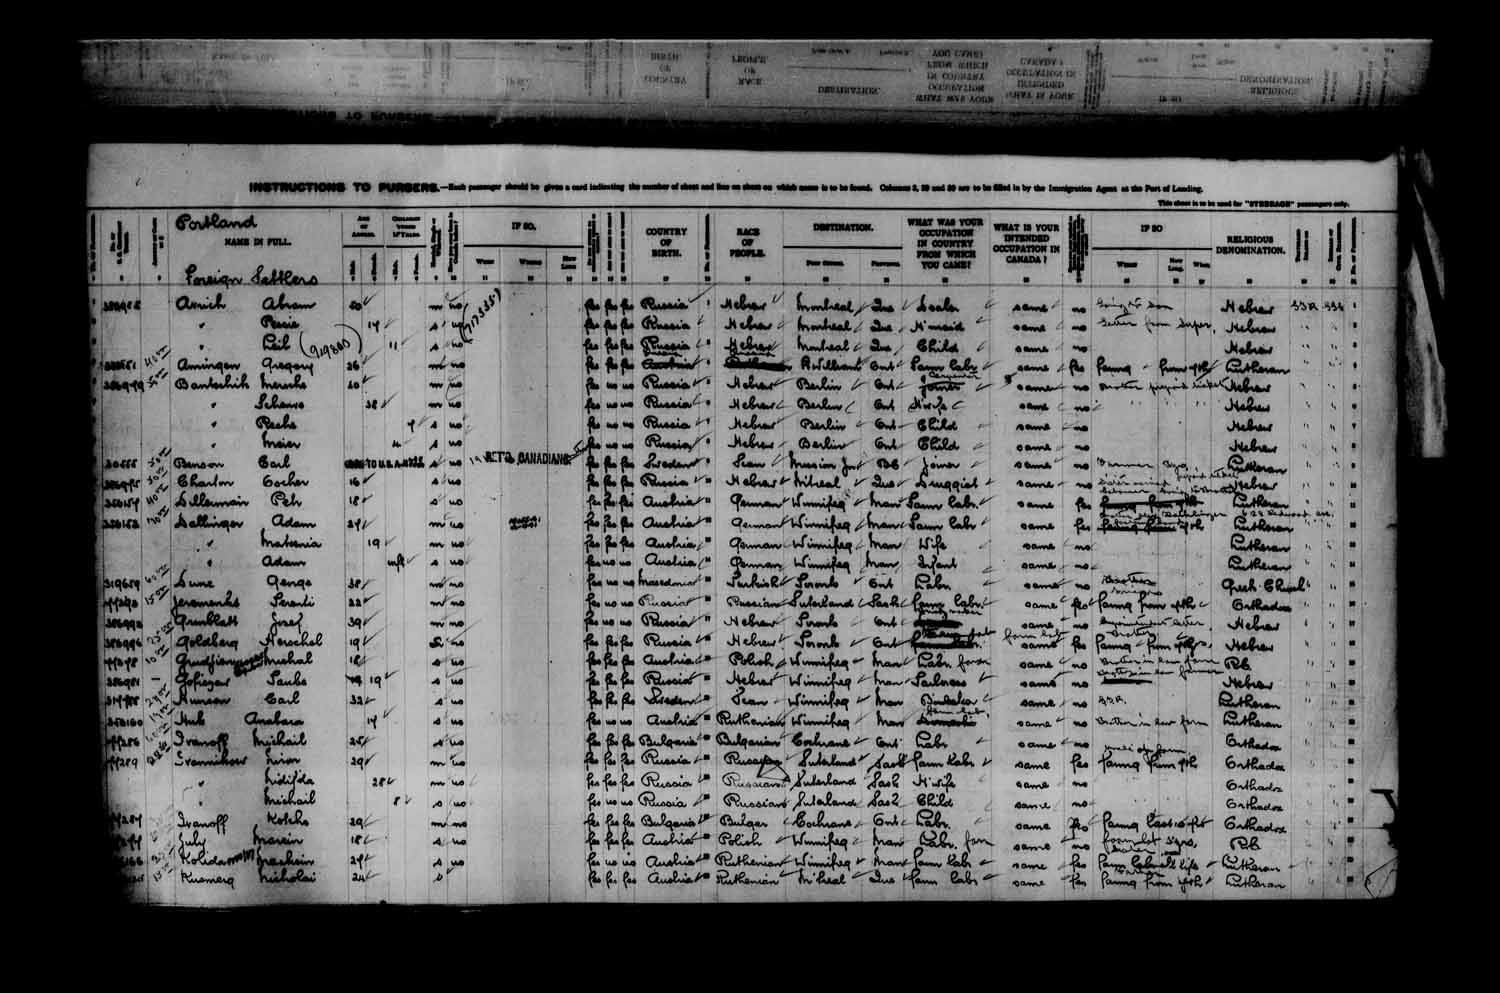 Digitized page of Passenger Lists for Image No.: e003622993